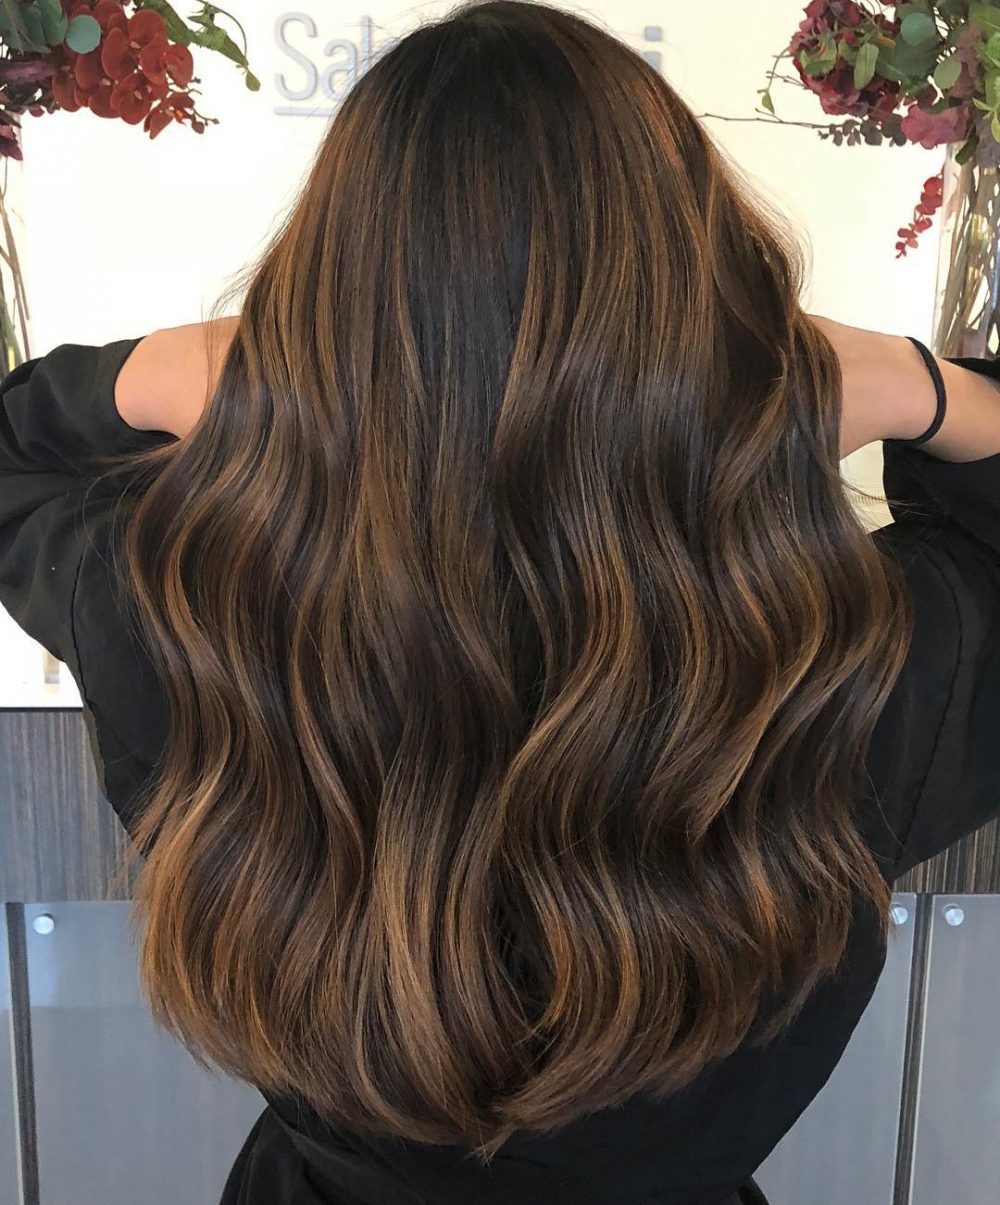 Long Black Hair with Easy Brown Highlights